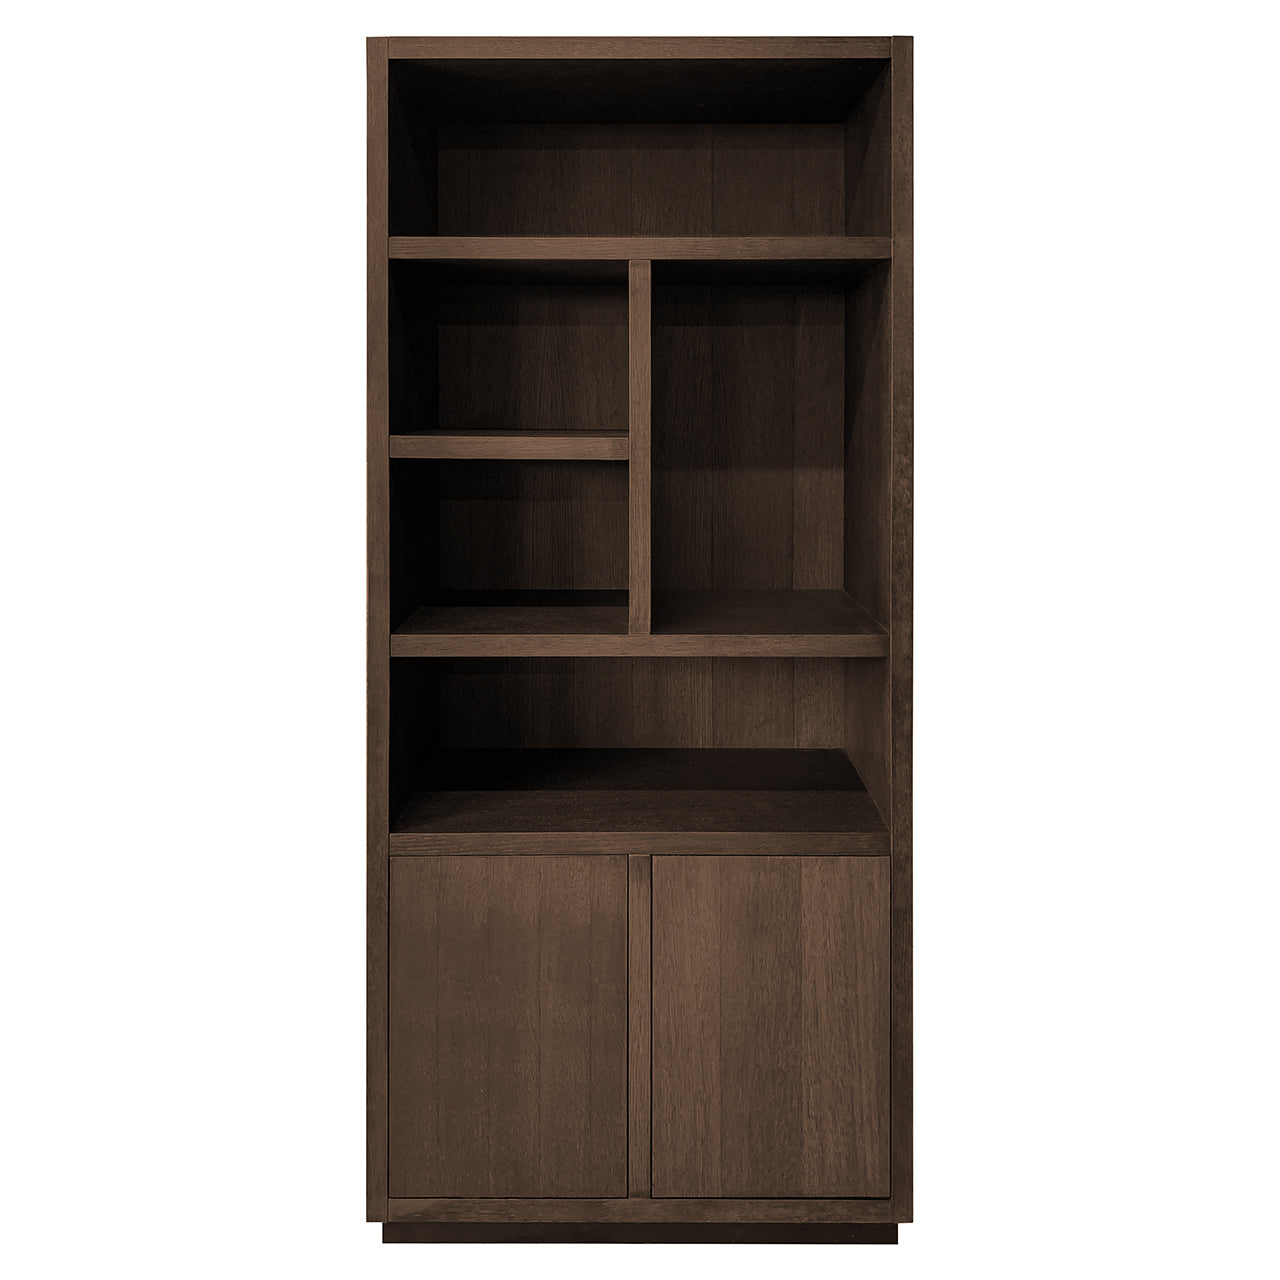 Oakura Large Brown Oak Wood Bookcase with 2 Doors by Richmond Interiors